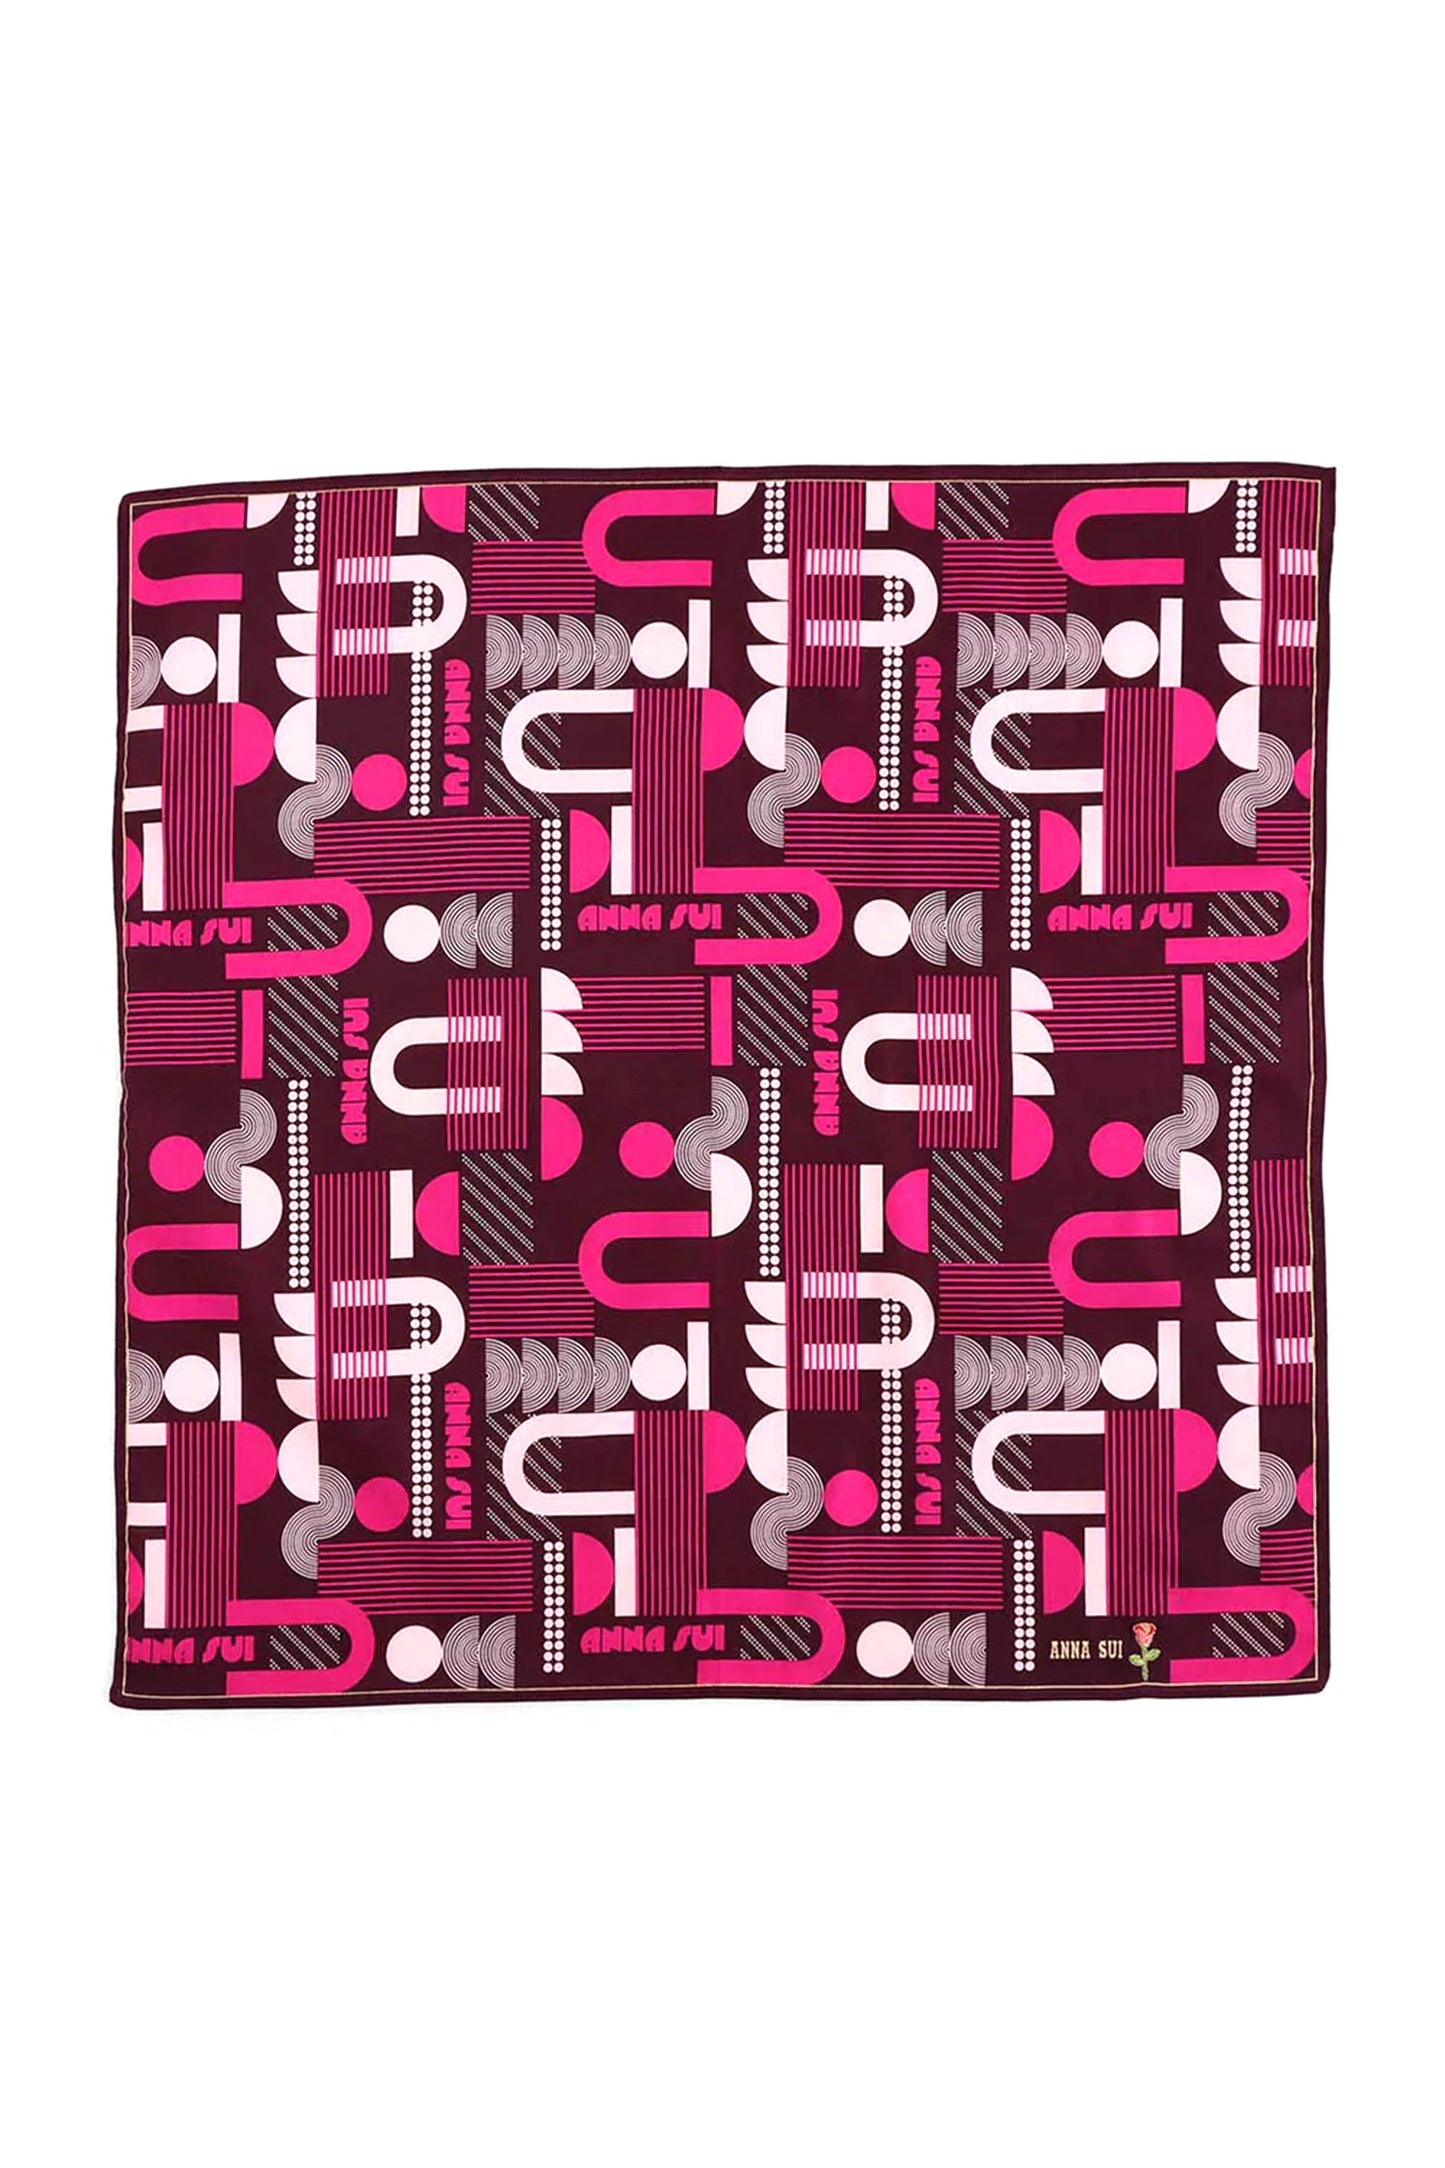 Squared  Handkerchief in burgundy with pink/white lines disco design, Anna’s label with a red rose